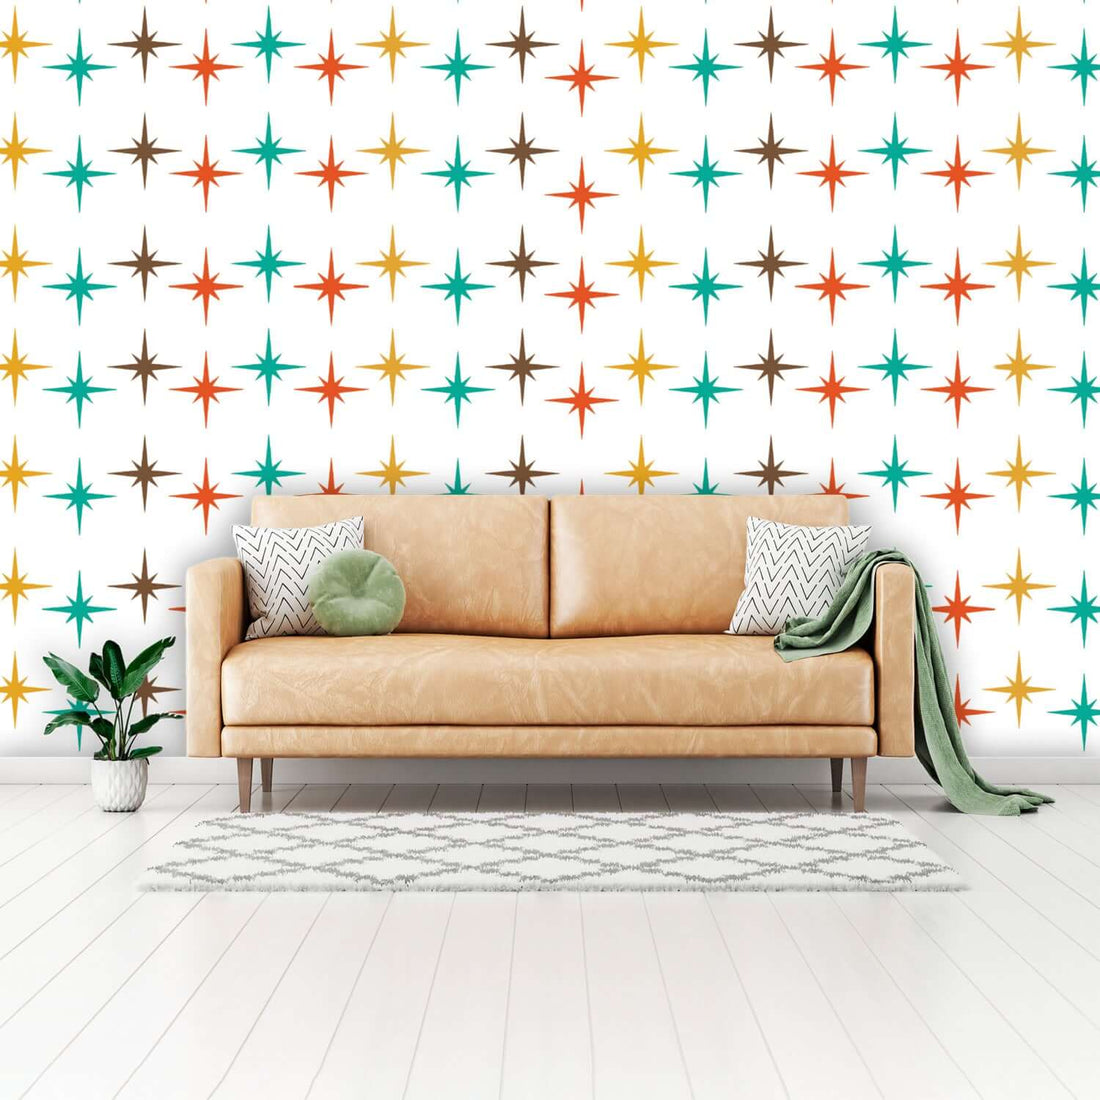 Atomic Age Unique Home Decor Peel And Stick Mid Century Modern, Mid Mod MCM Wall Murals Wallpaper H110 x W160